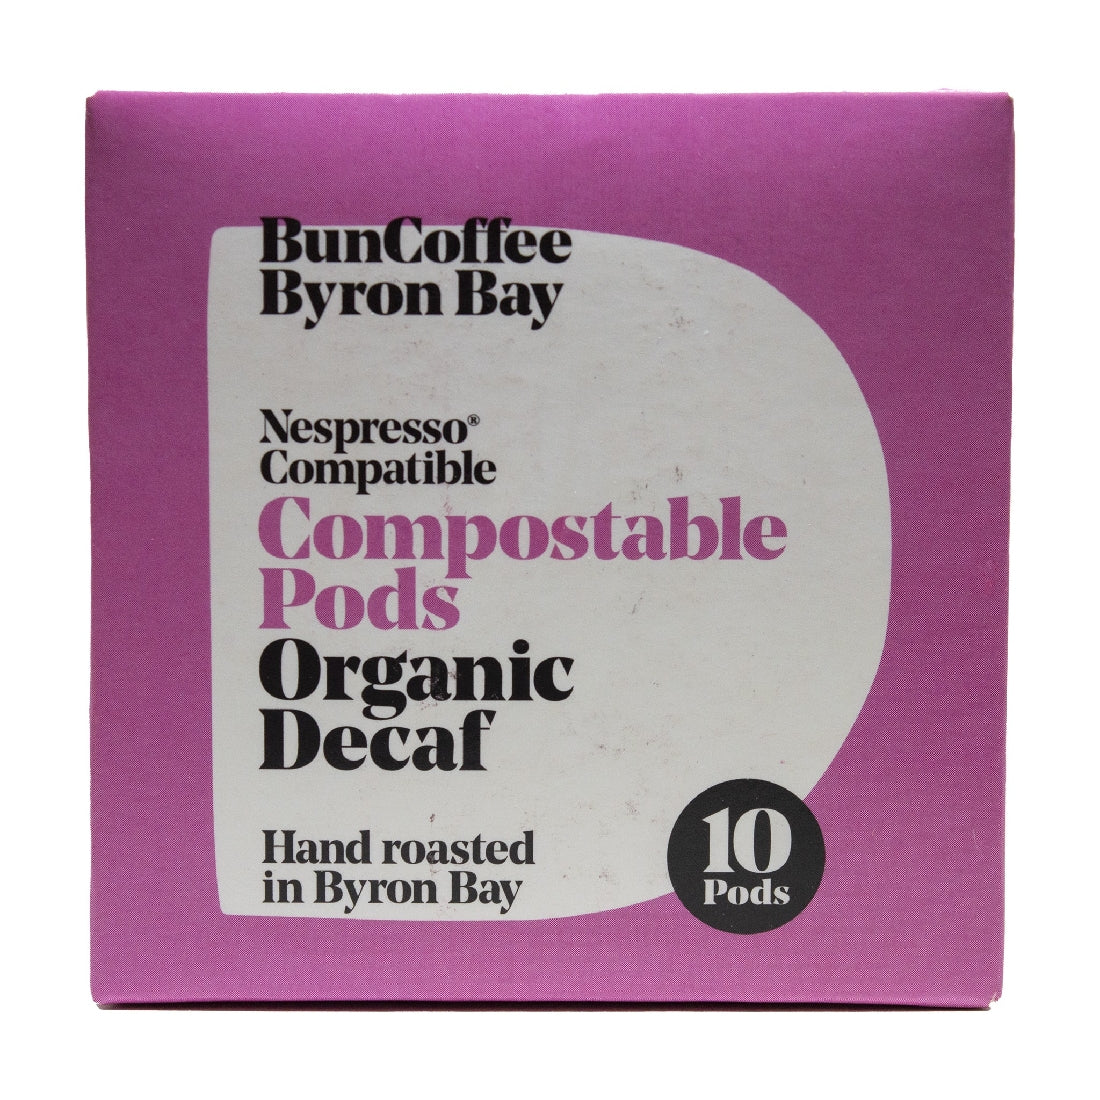 BUNCOFFEE COMPOSTABLE PODS ORGANIC DECAF 10 PODS